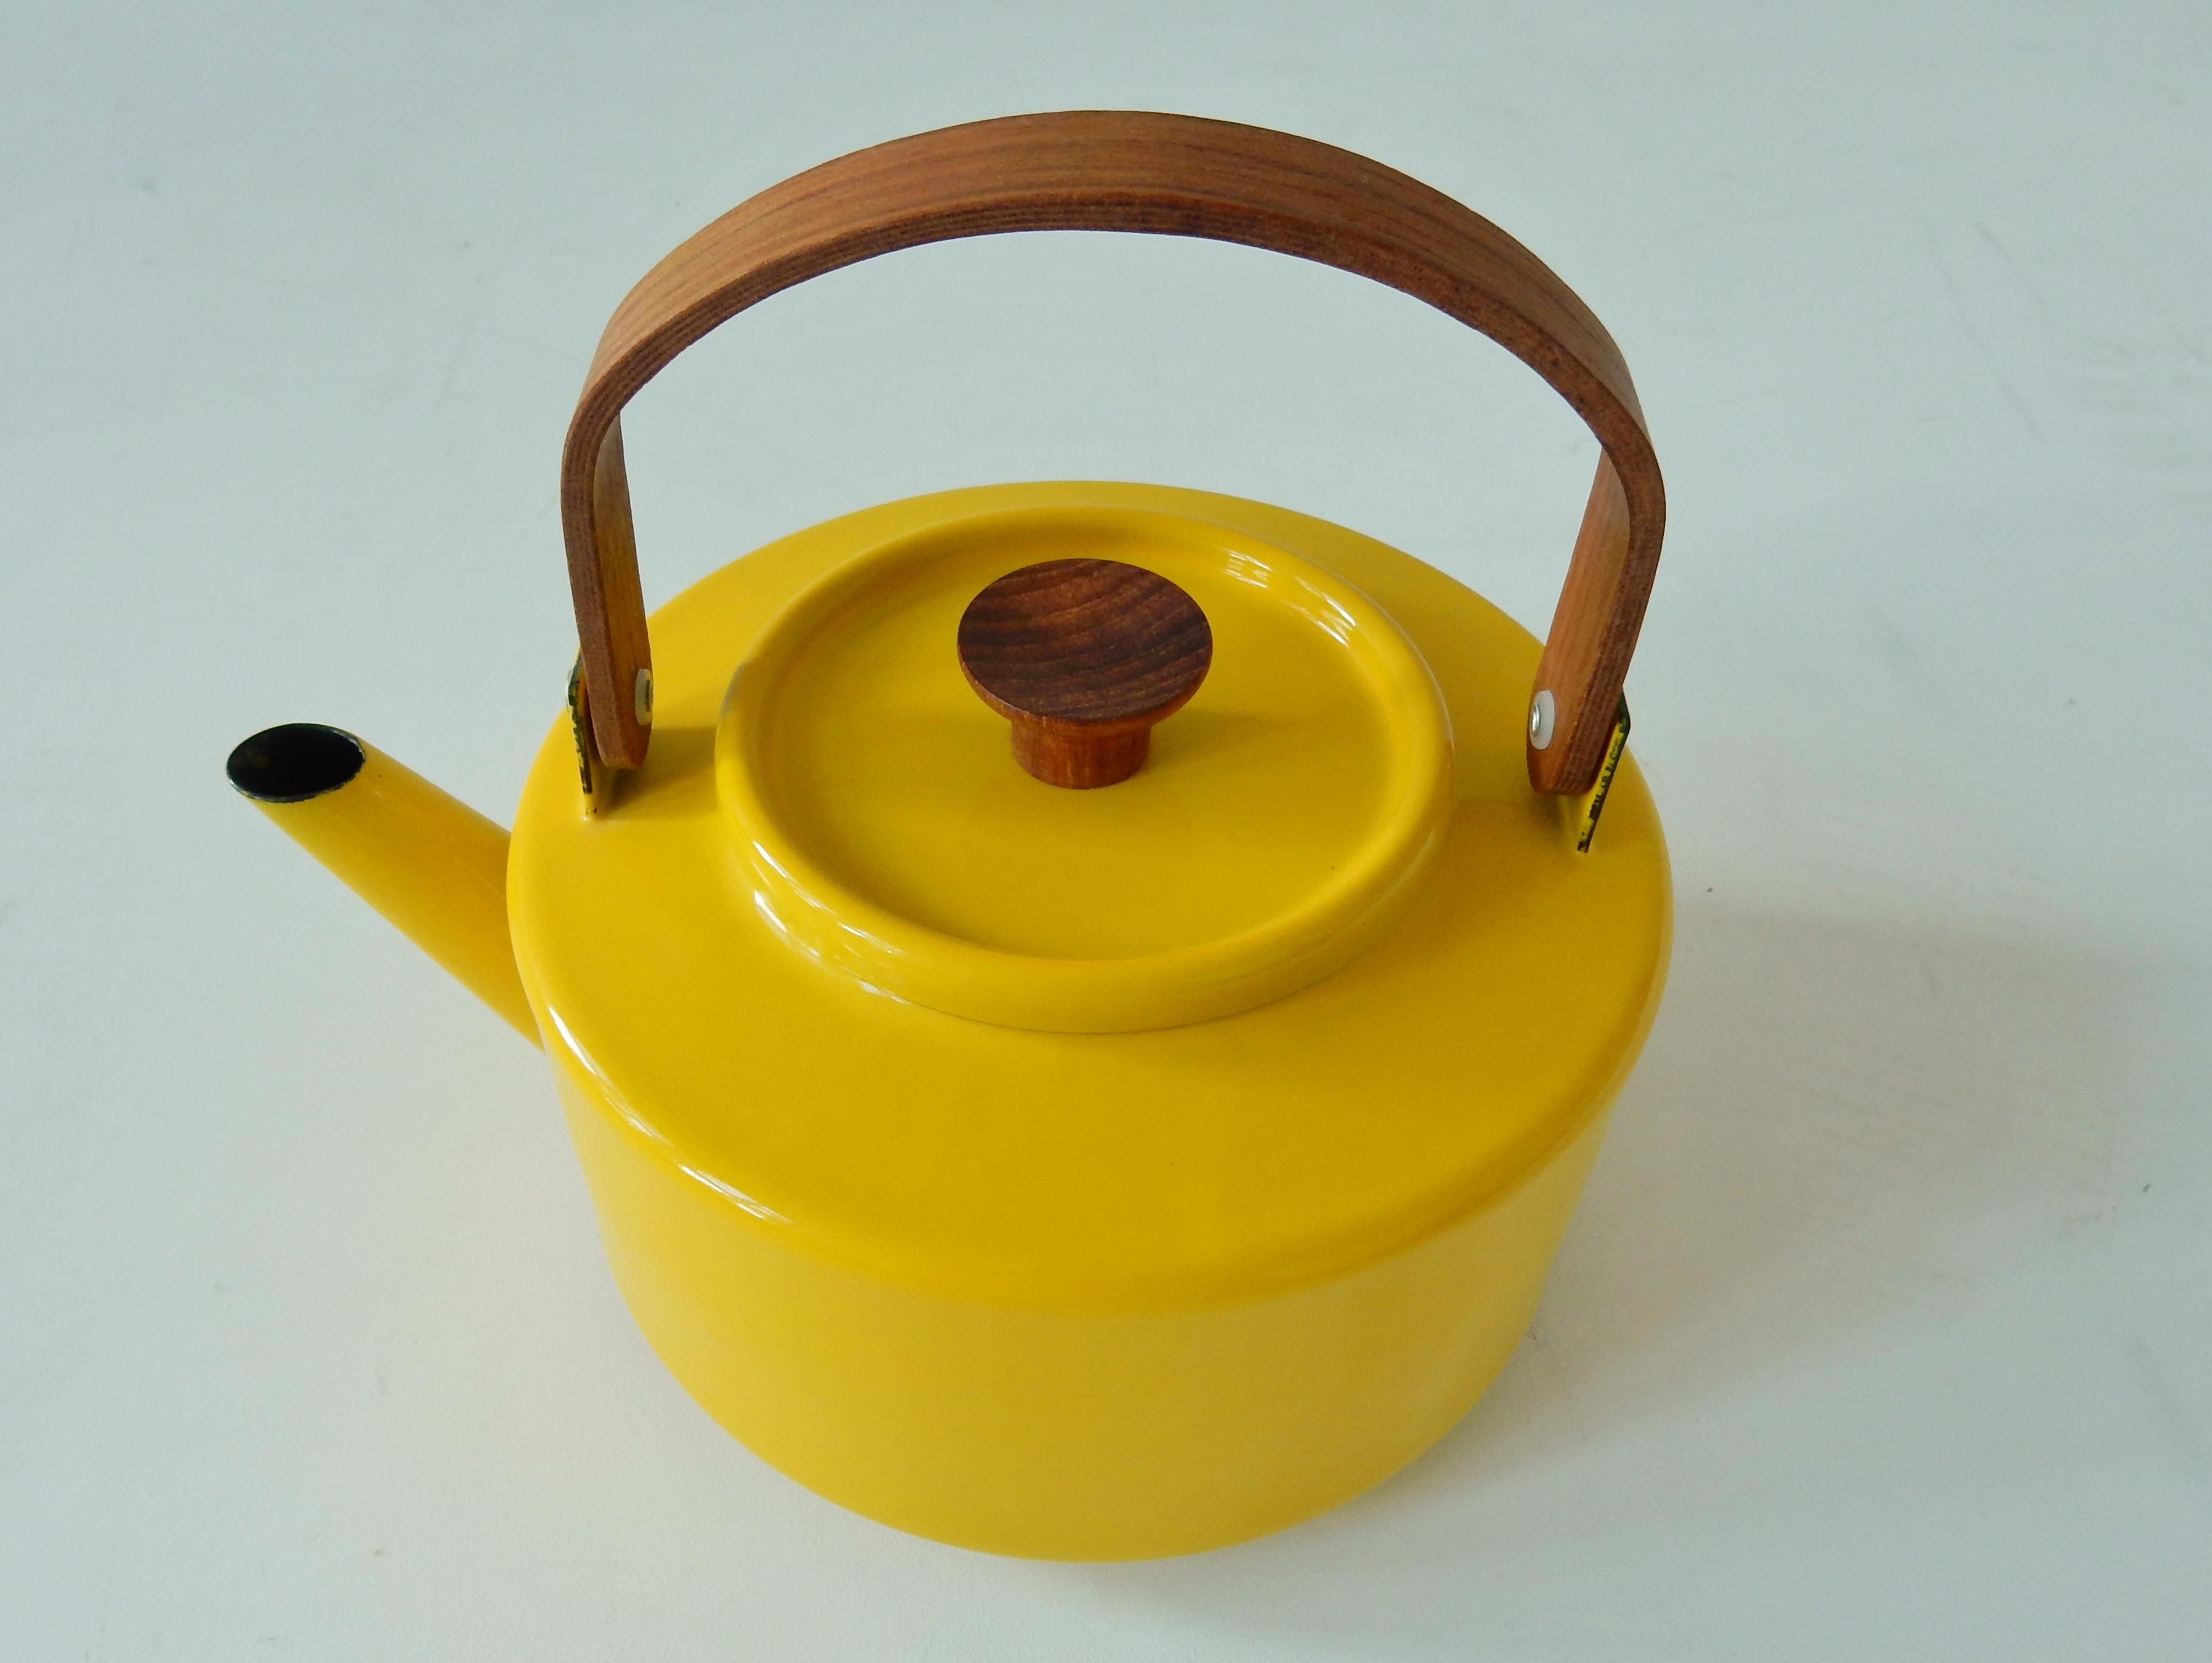 This is a very nice yellow enameled tea kettle designed by Michael Lax for Copco in Spain in 1960. The teapot is signed on the bottom and it is in a very good condition with minor signs of age and use. Delivered in the original